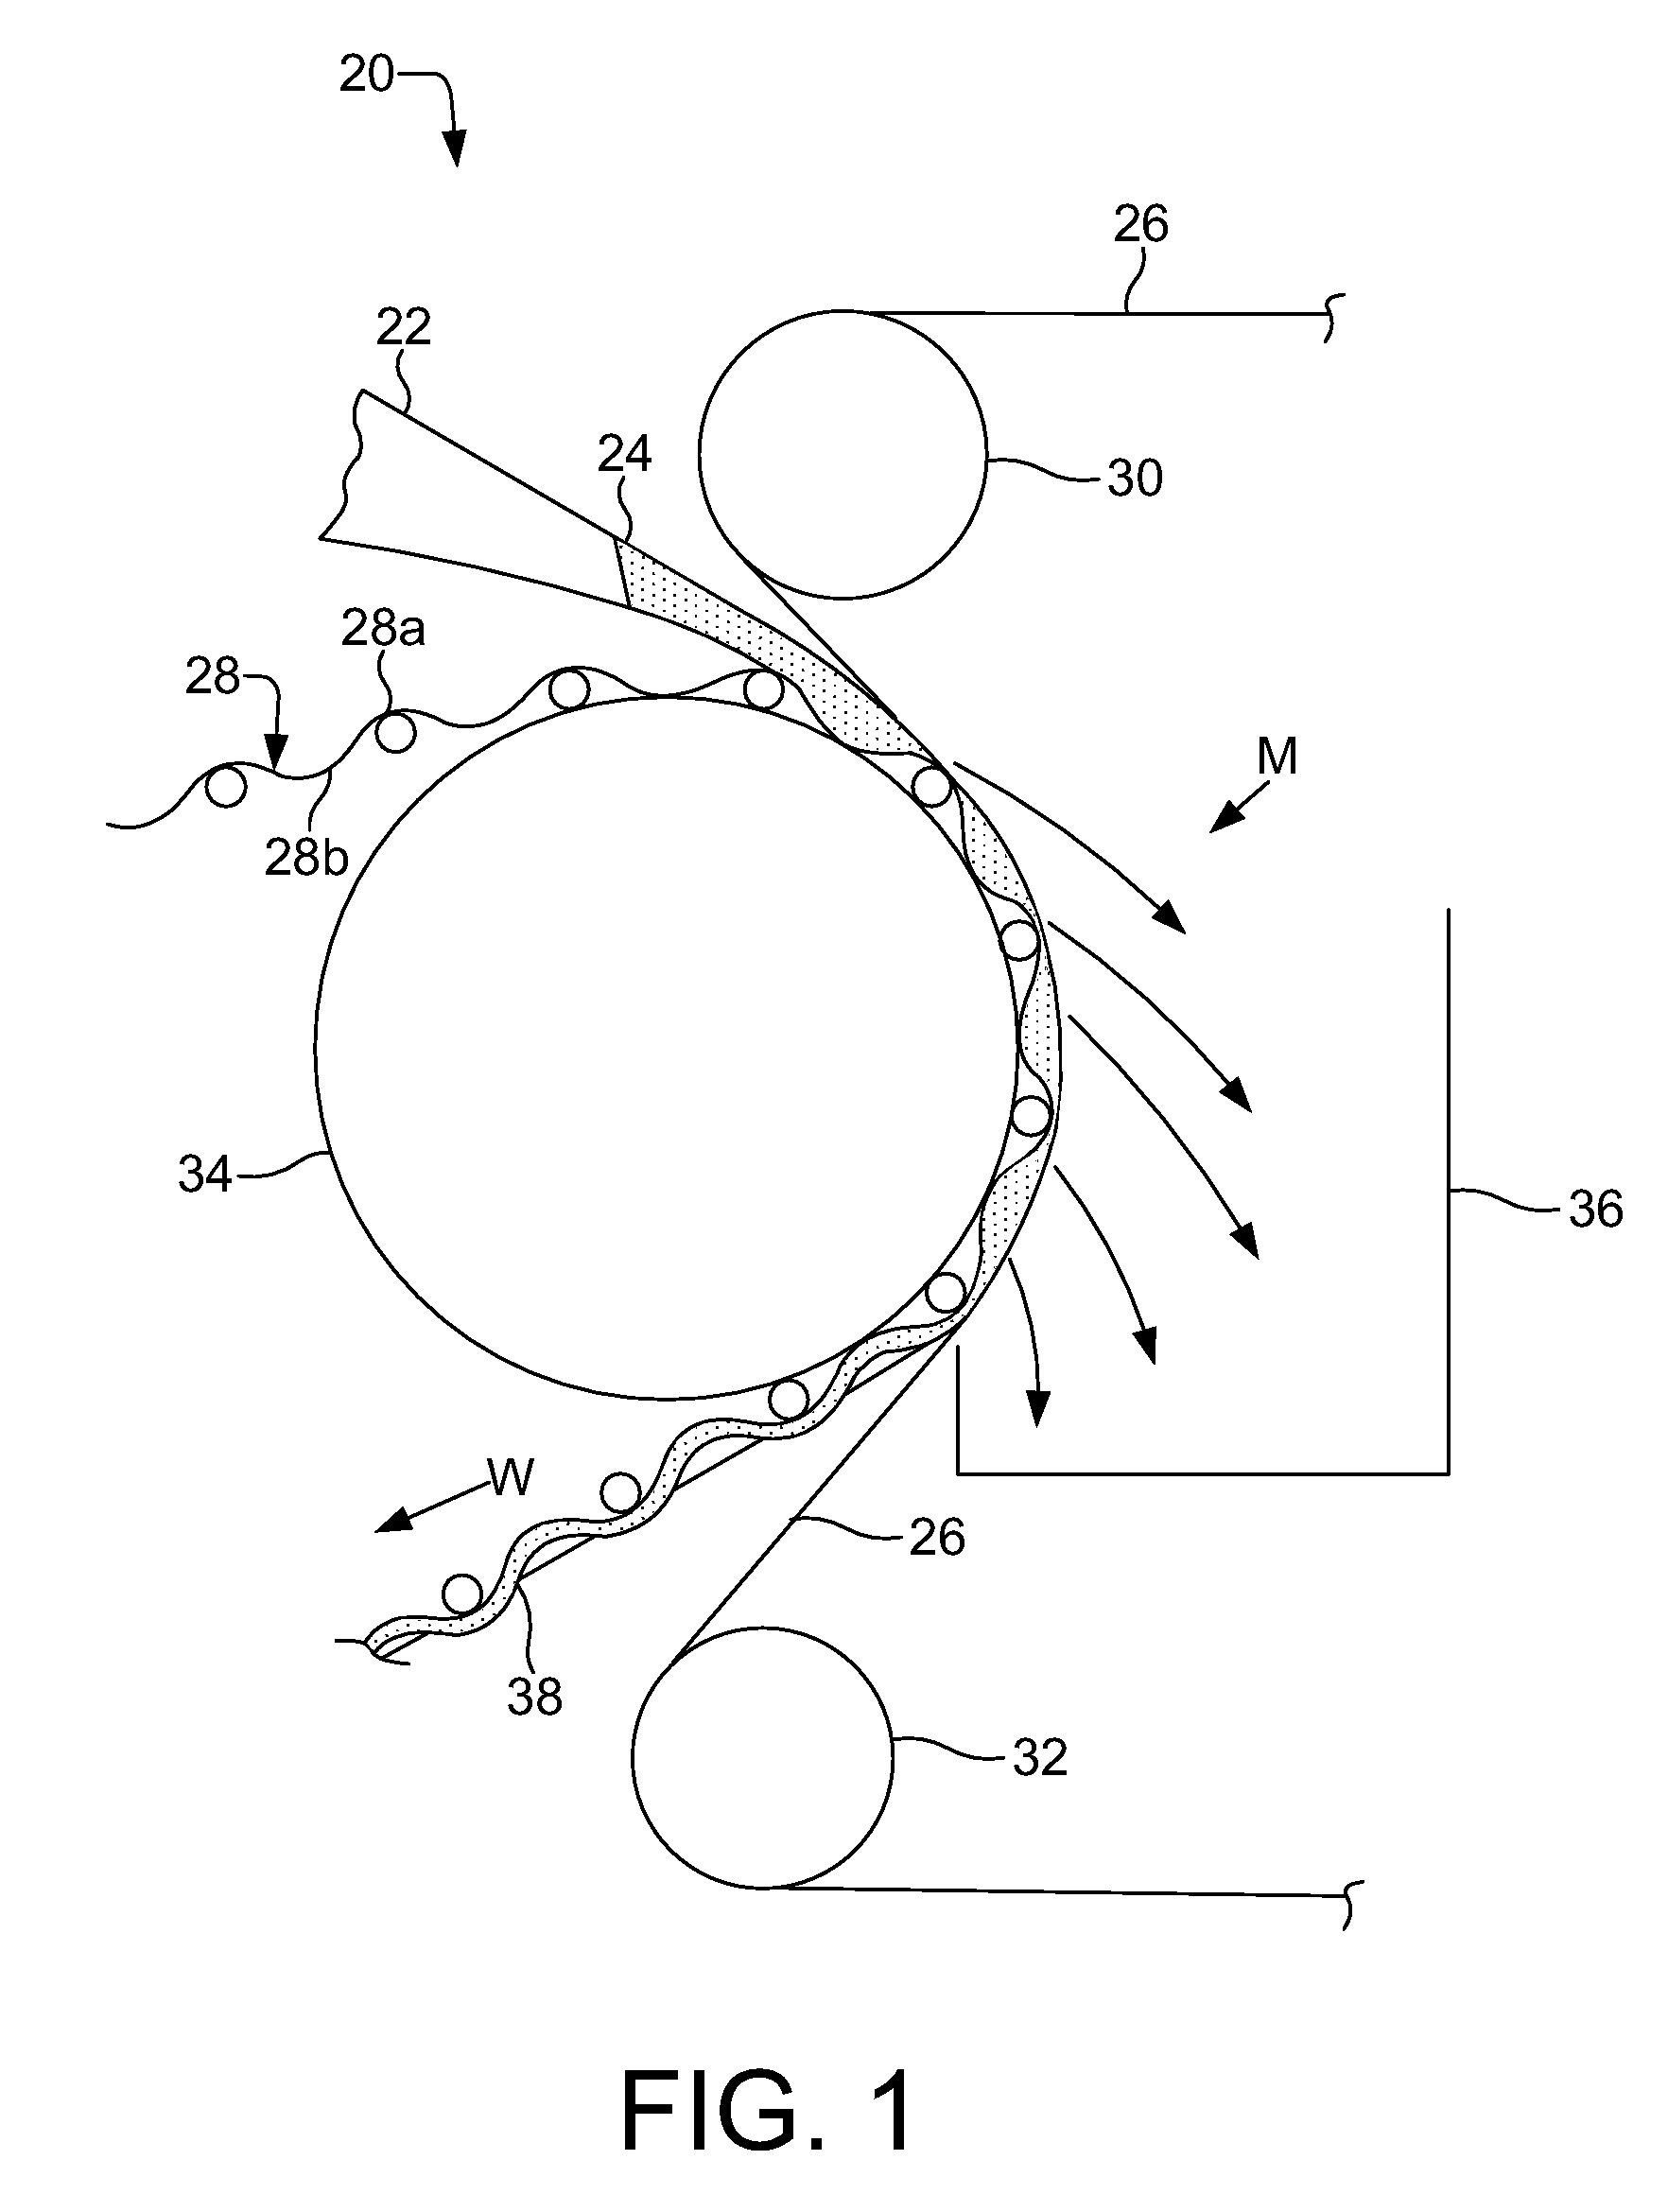 Process of material web formation on a structured fabric in a paper machine